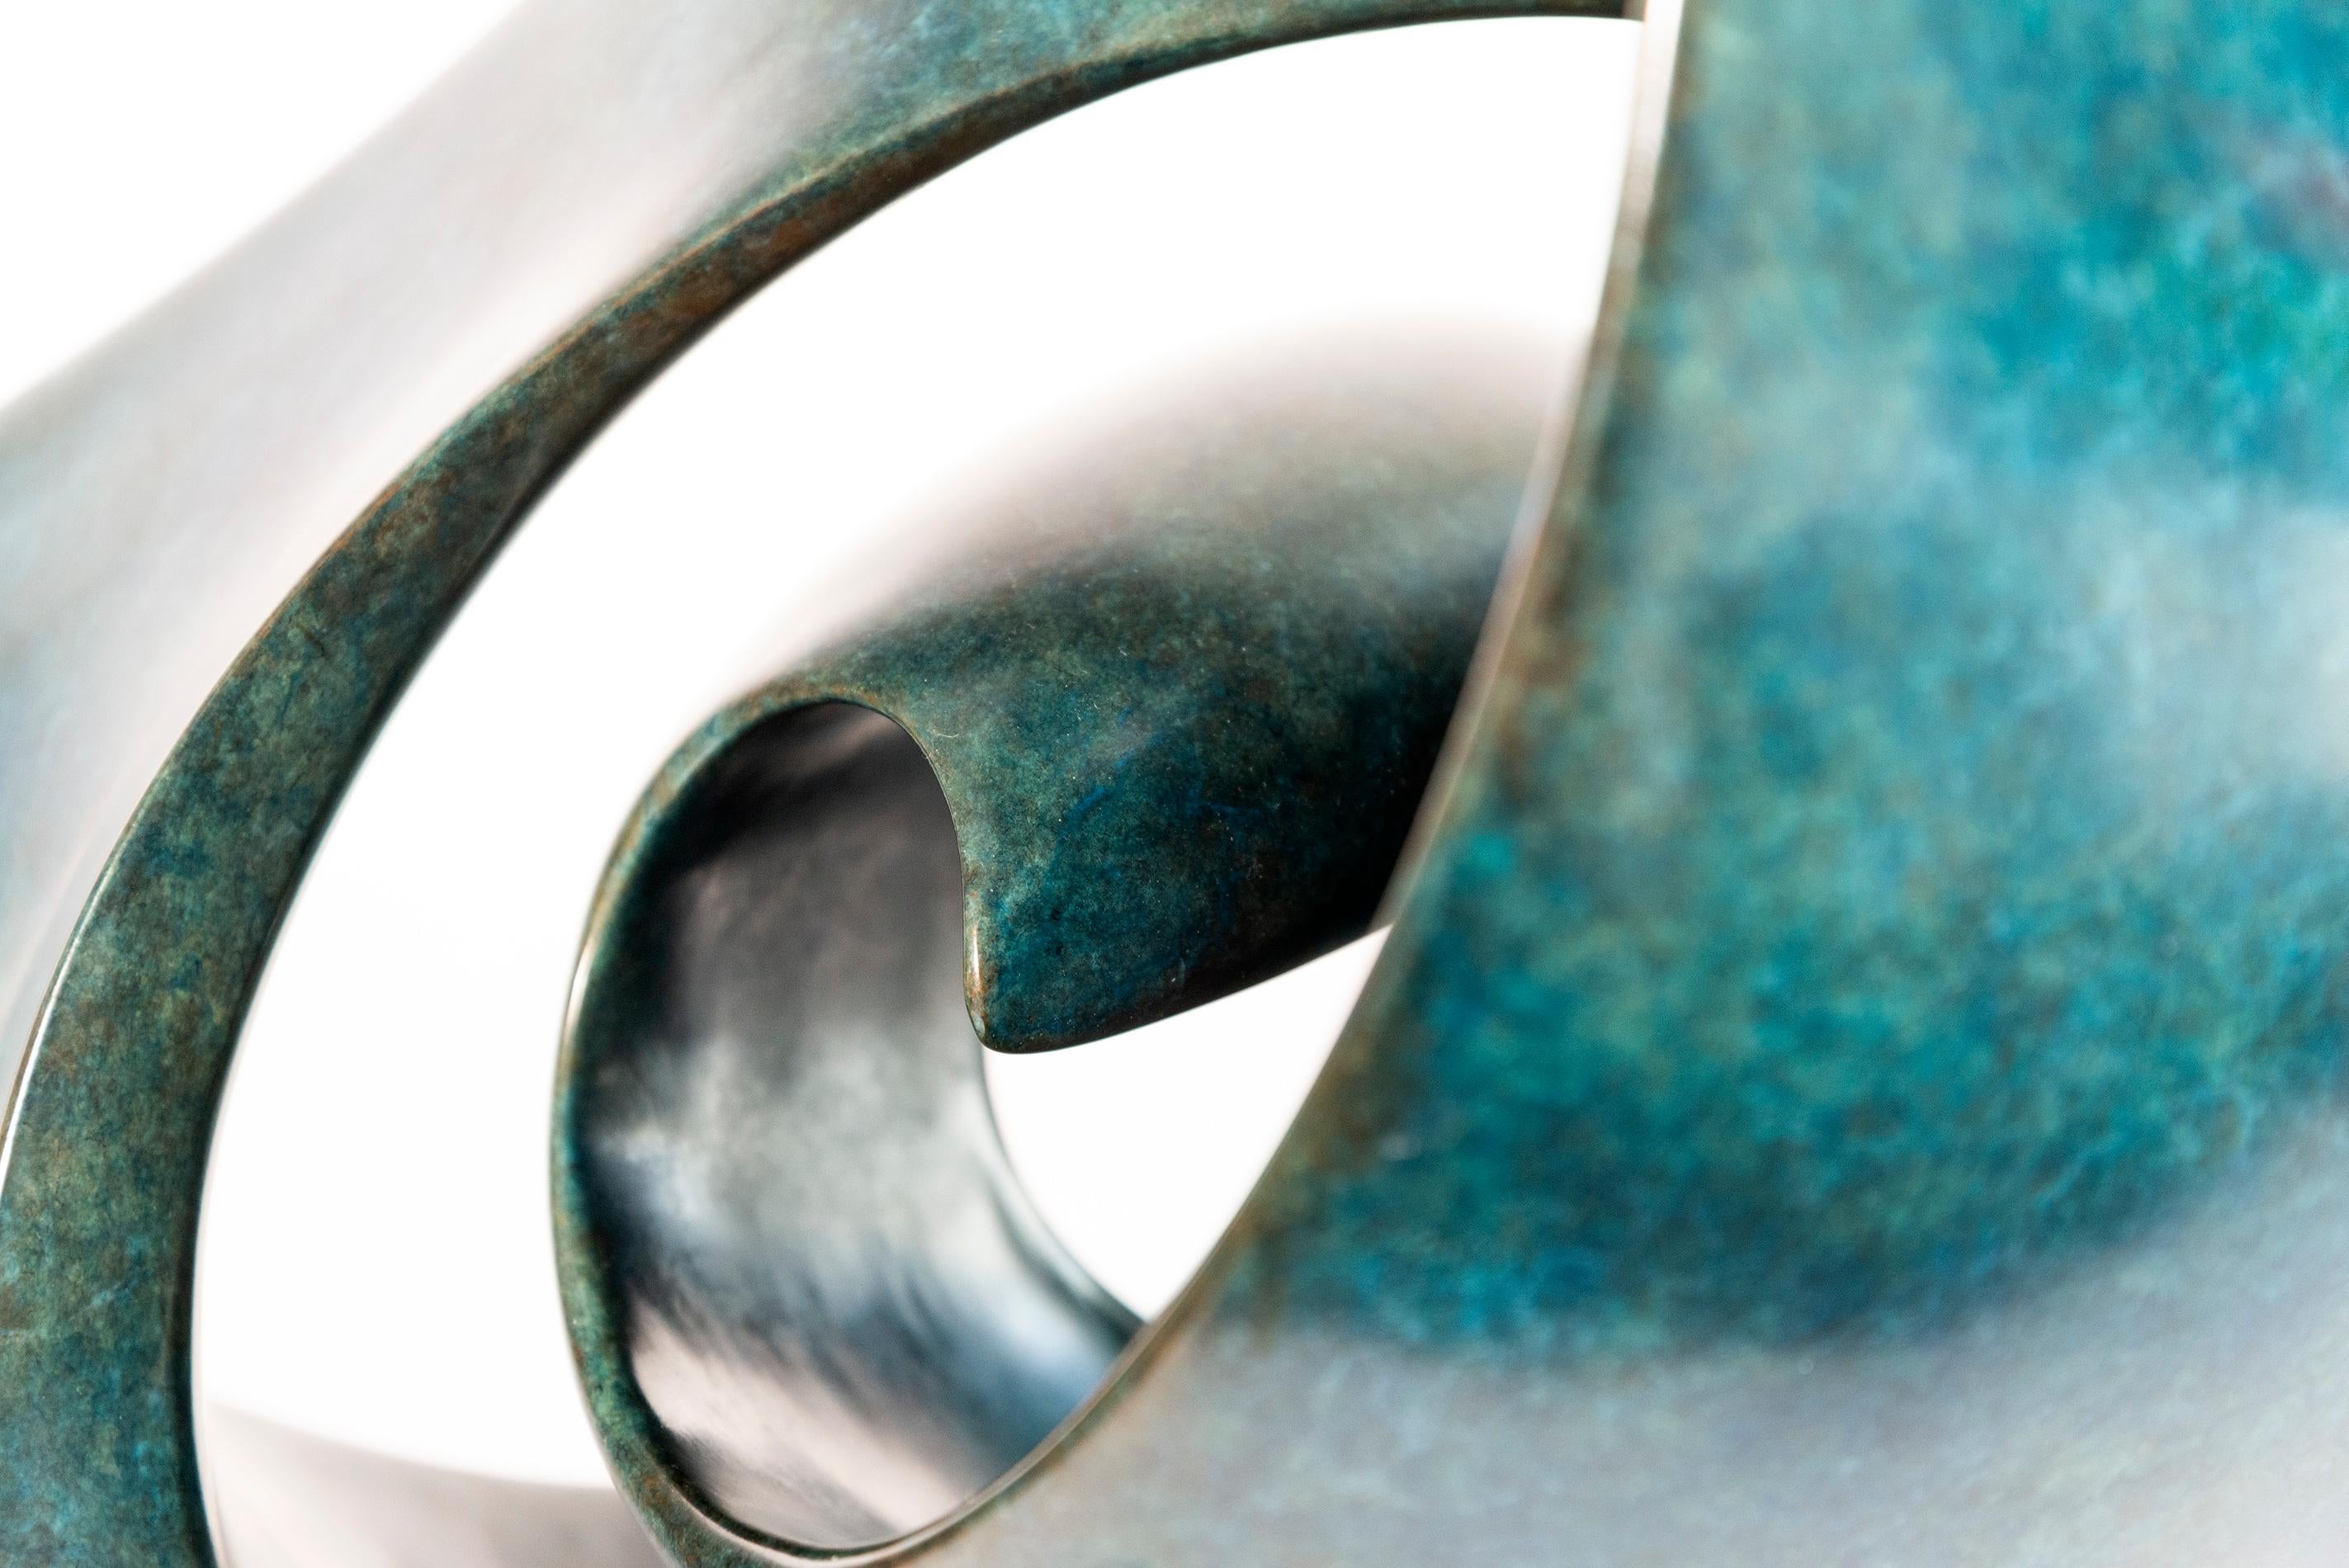 Eroica A.P. 1 - smooth, polished, abstract, contemporary, bronze sculpture For Sale 11